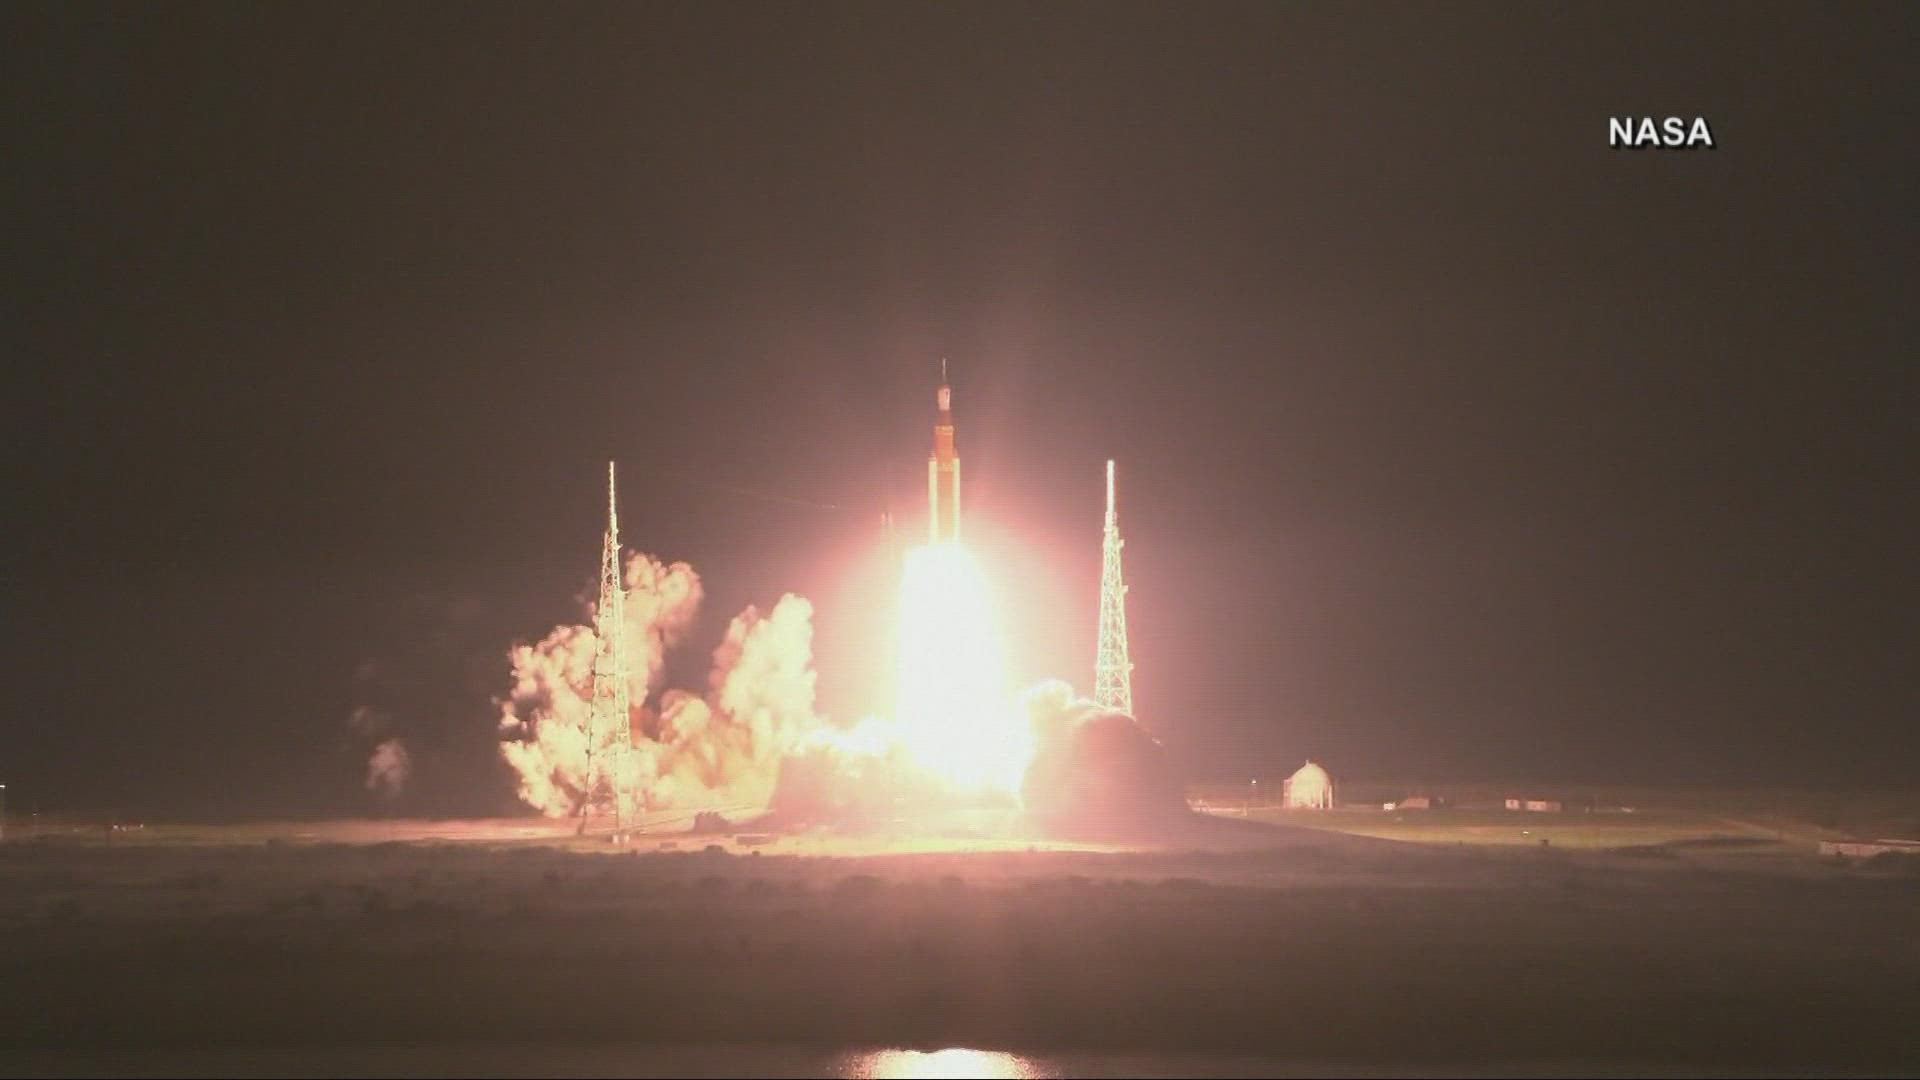 NASA's new moon rocket blasted off on its debut flight with three test dummies aboard early Wednesday.